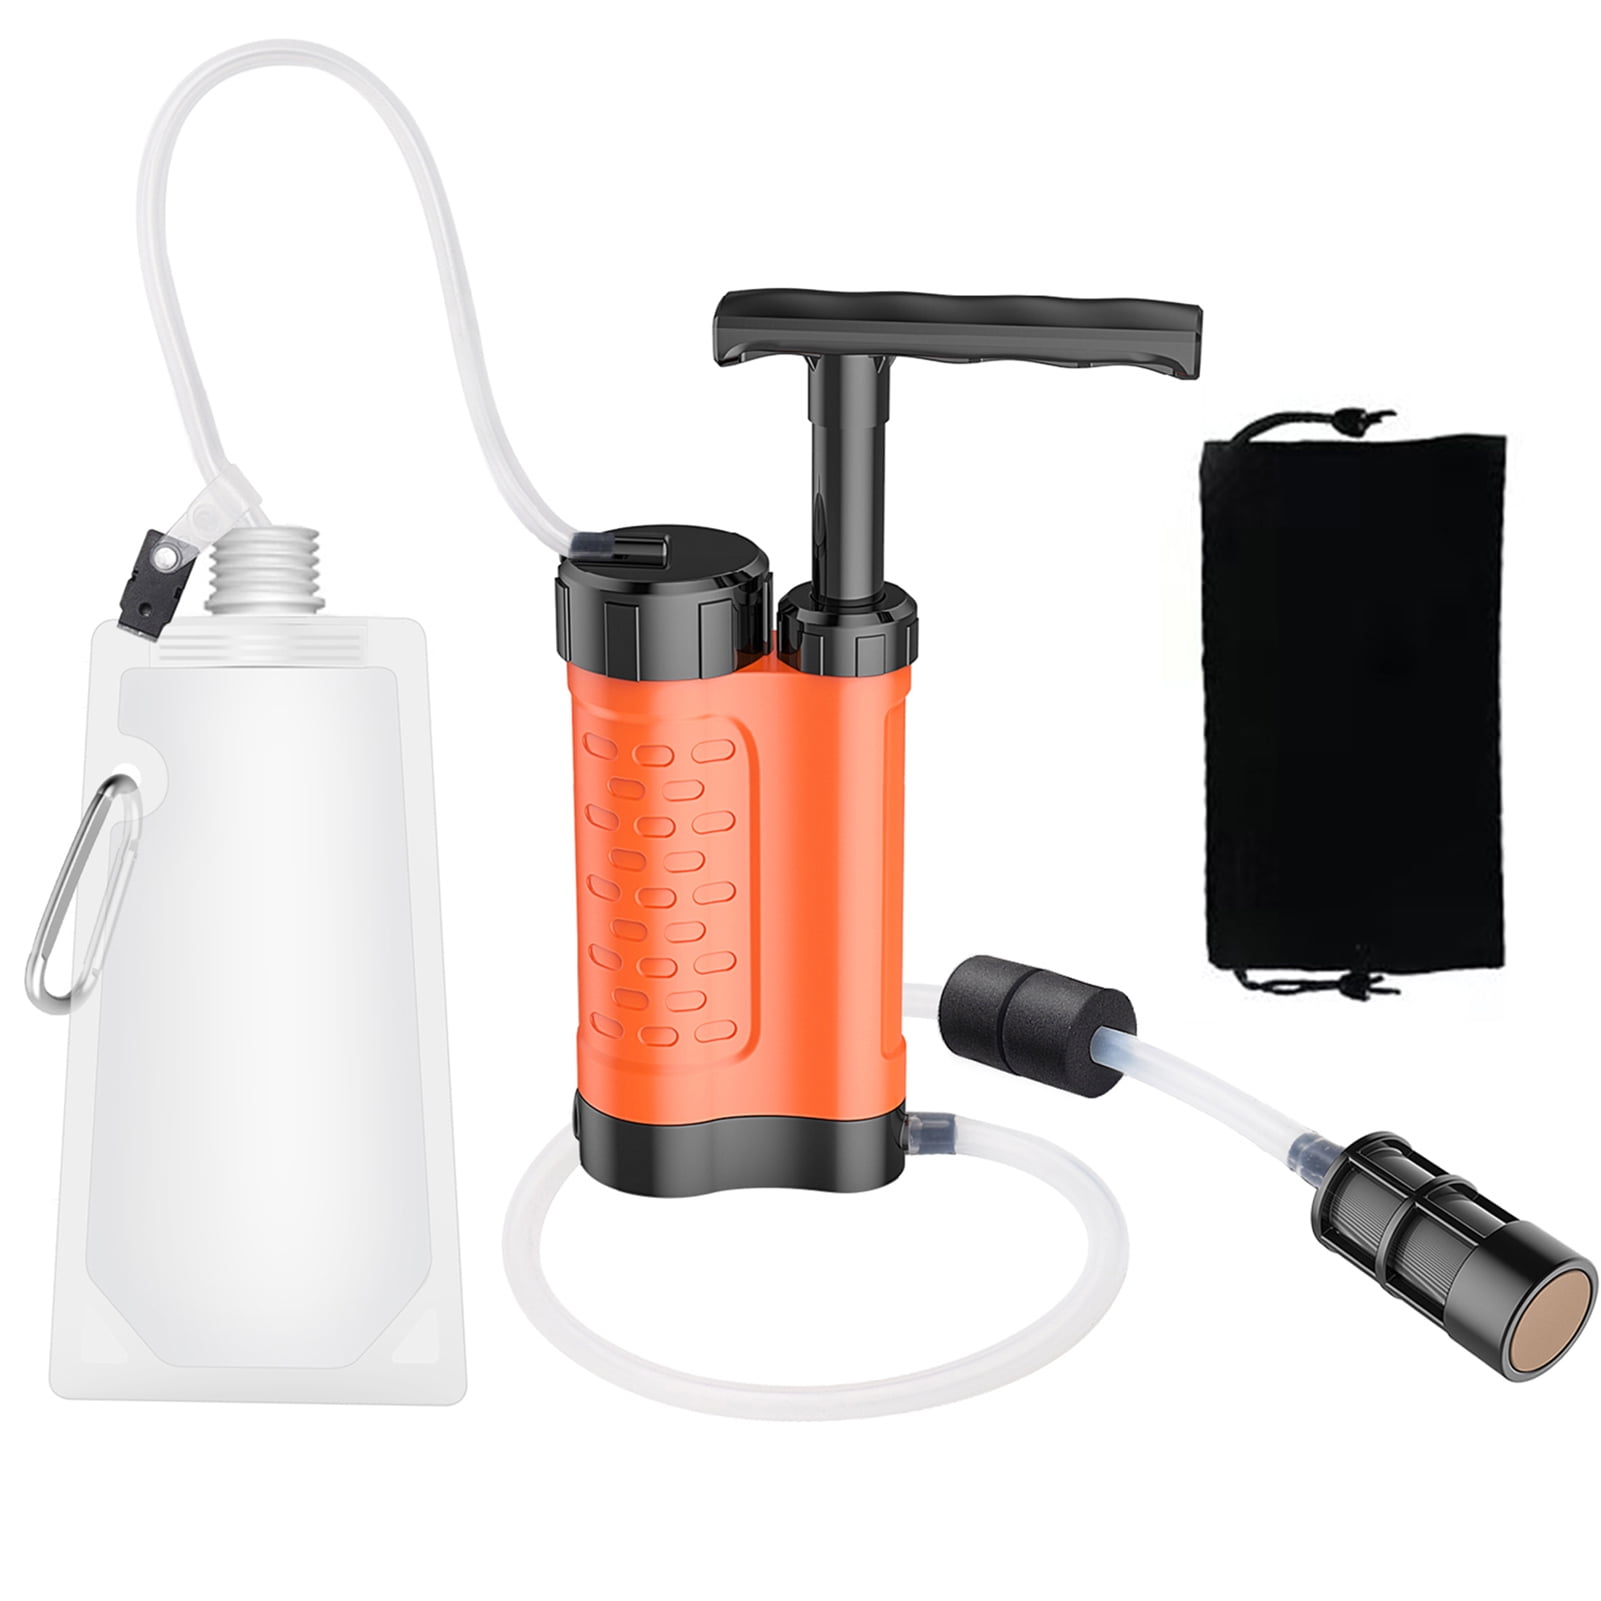 Portable Water Filter Purifier Pump w/ Hose for Outdoor Survival Camping Hiking 